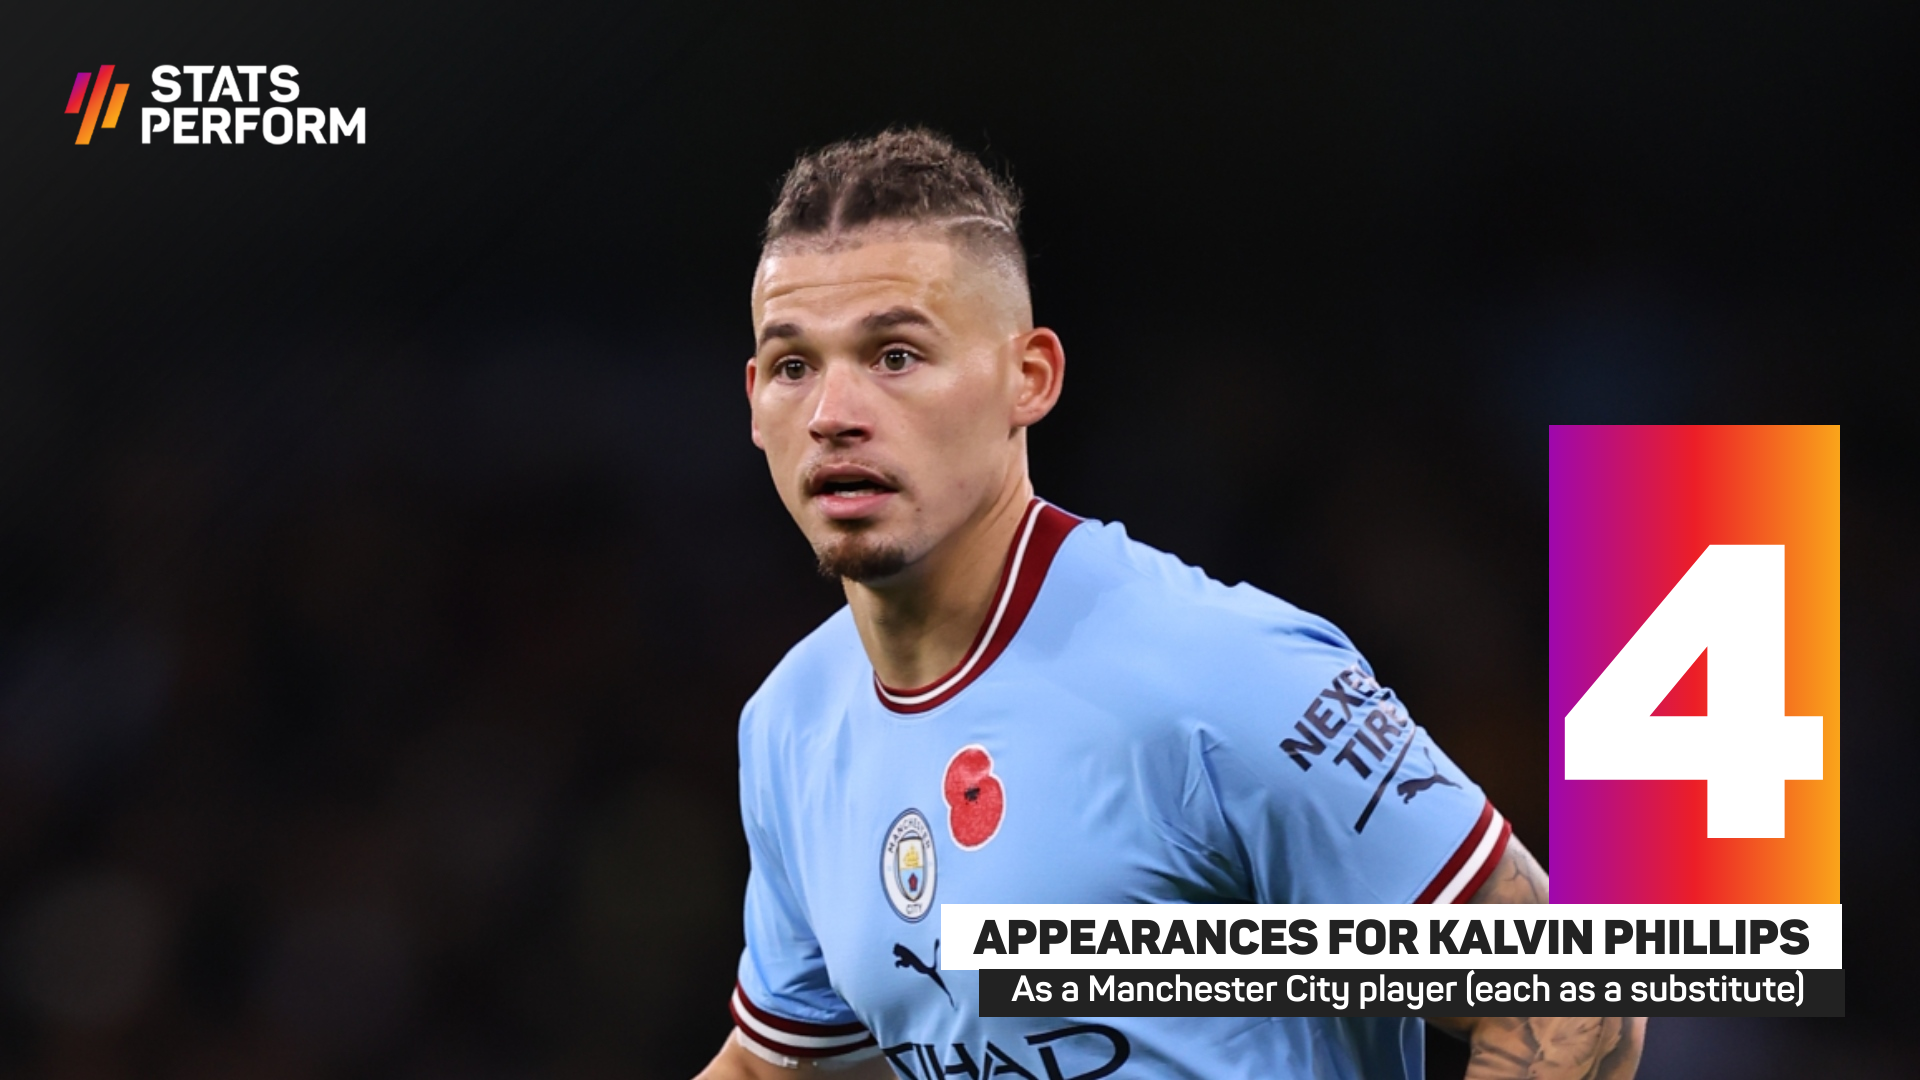 Kalvin Phillips has made just four appearances for Man City